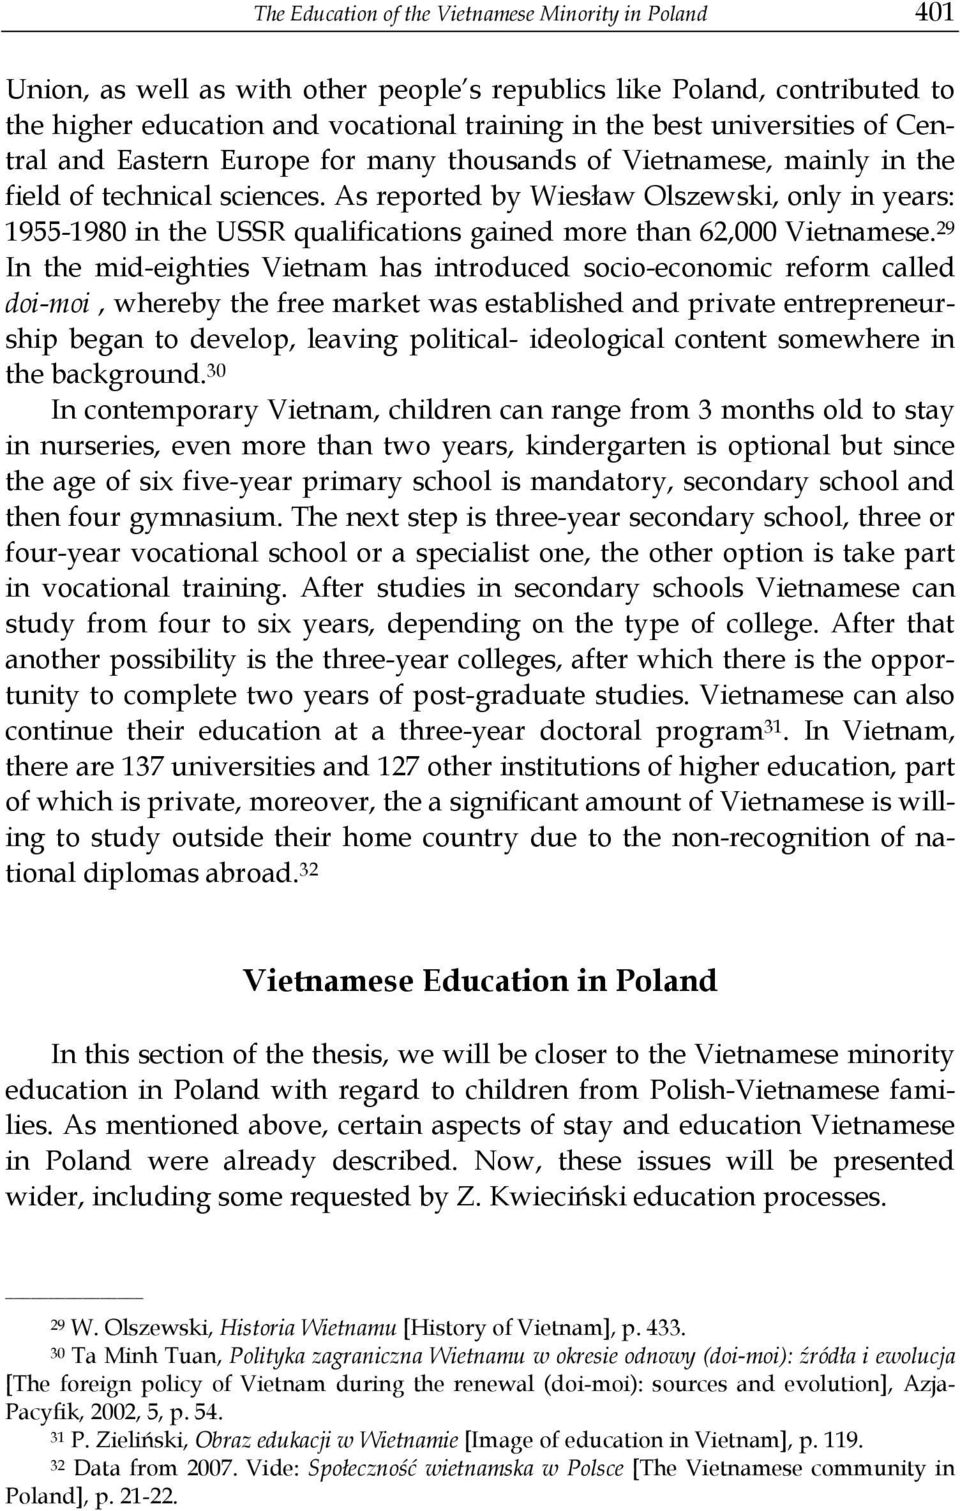 As reported by Wiesław Olszewski, only in years: 1955-1980 in the USSR qualifications gained more than 62,000 Vietnamese.